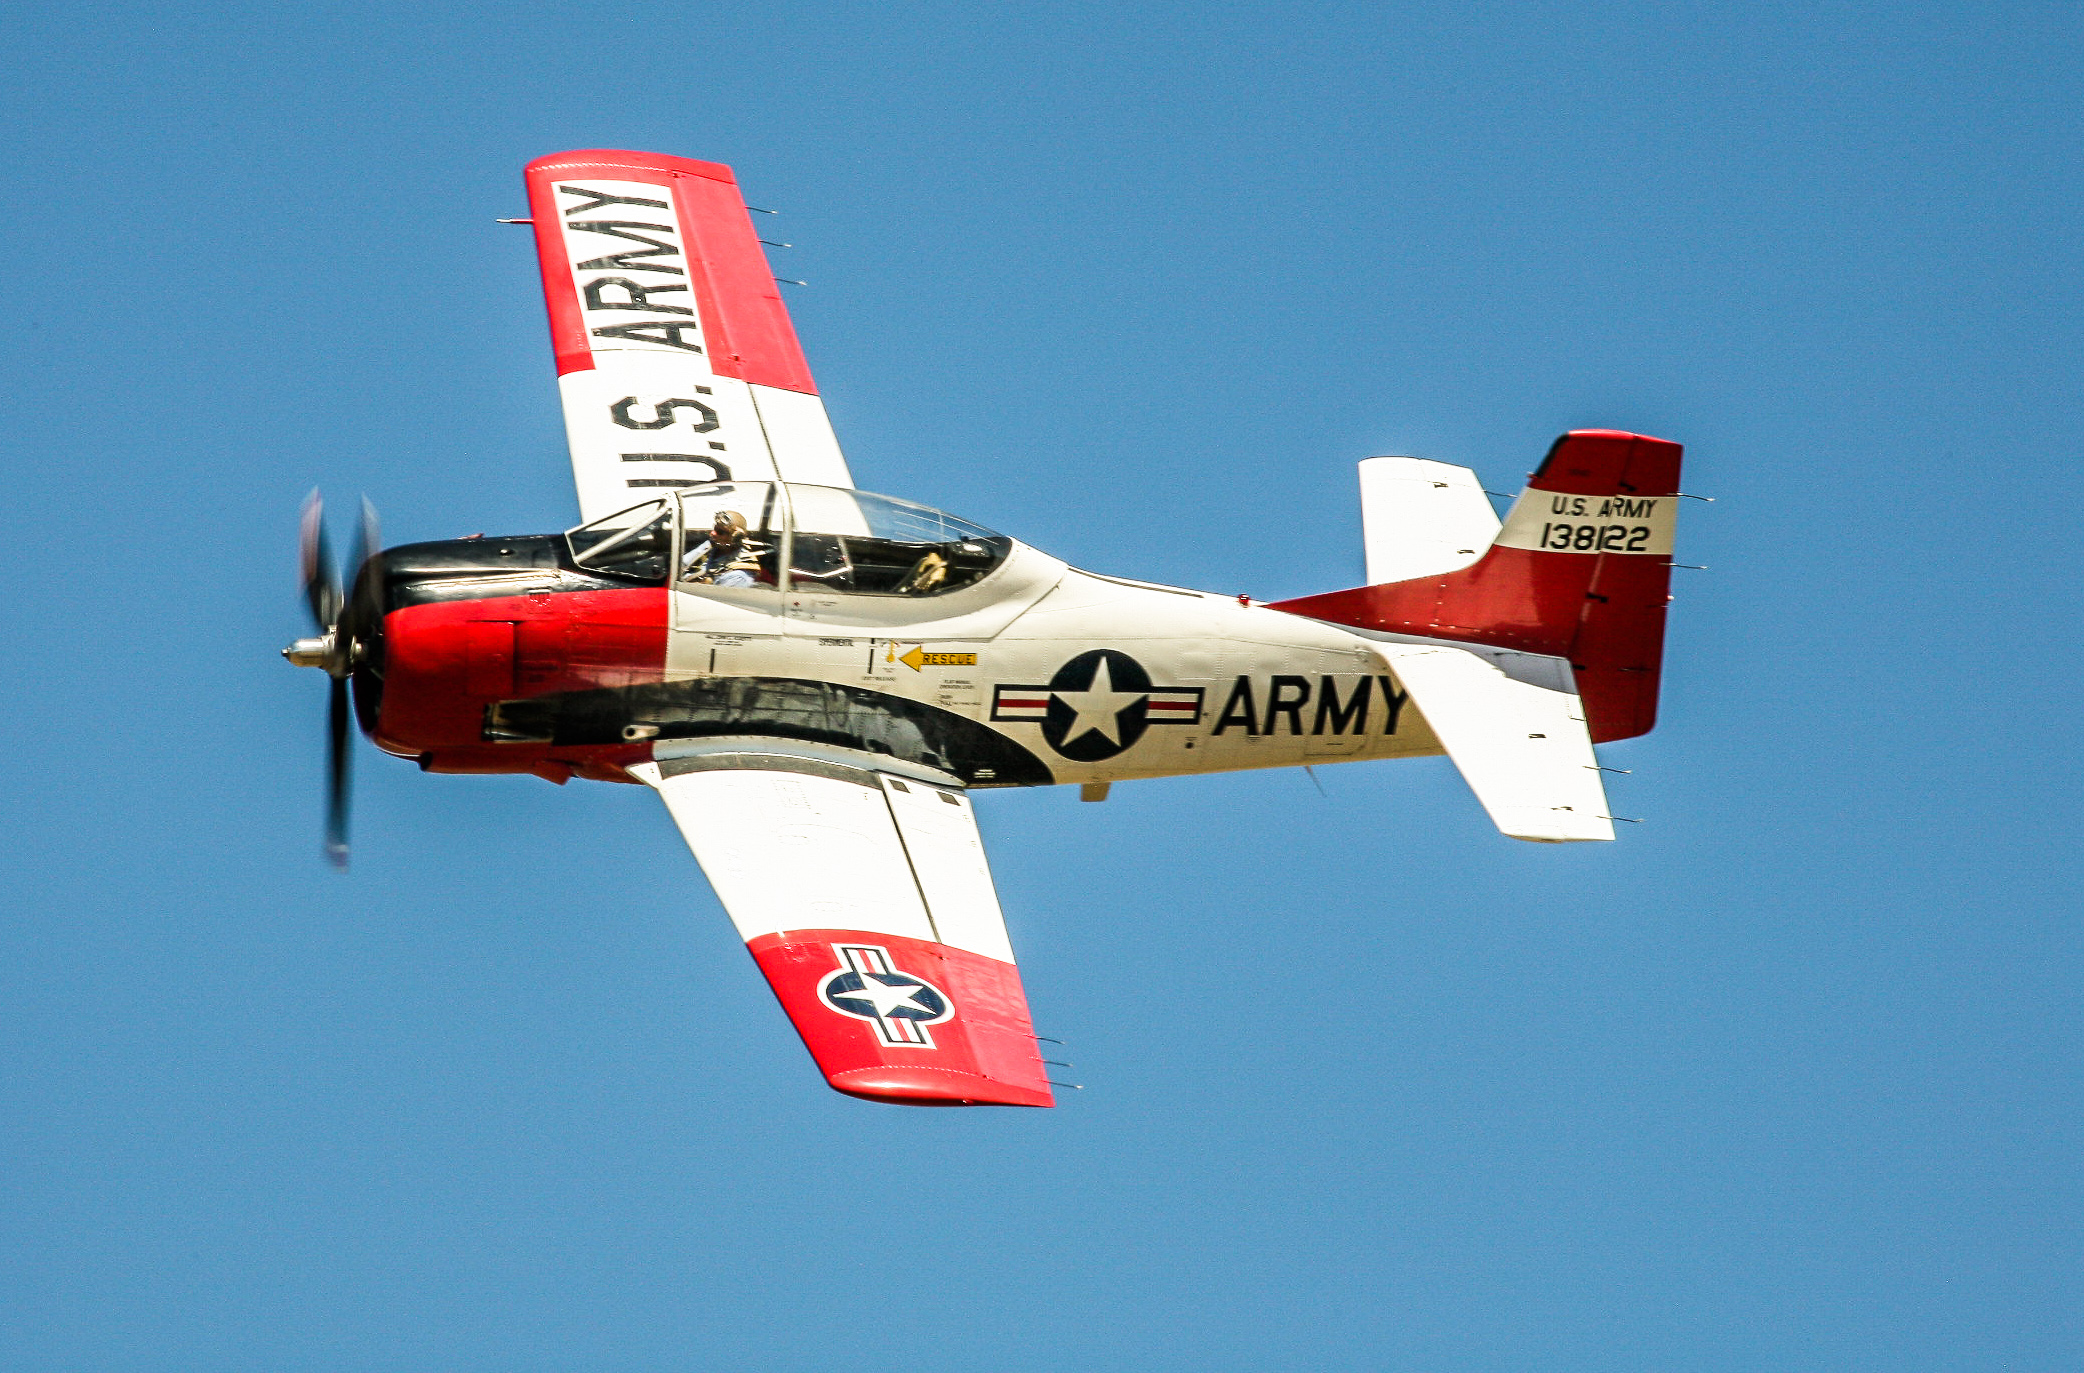 Cameron Rolf Smith in his T-28. (photo by Phil Buckley)